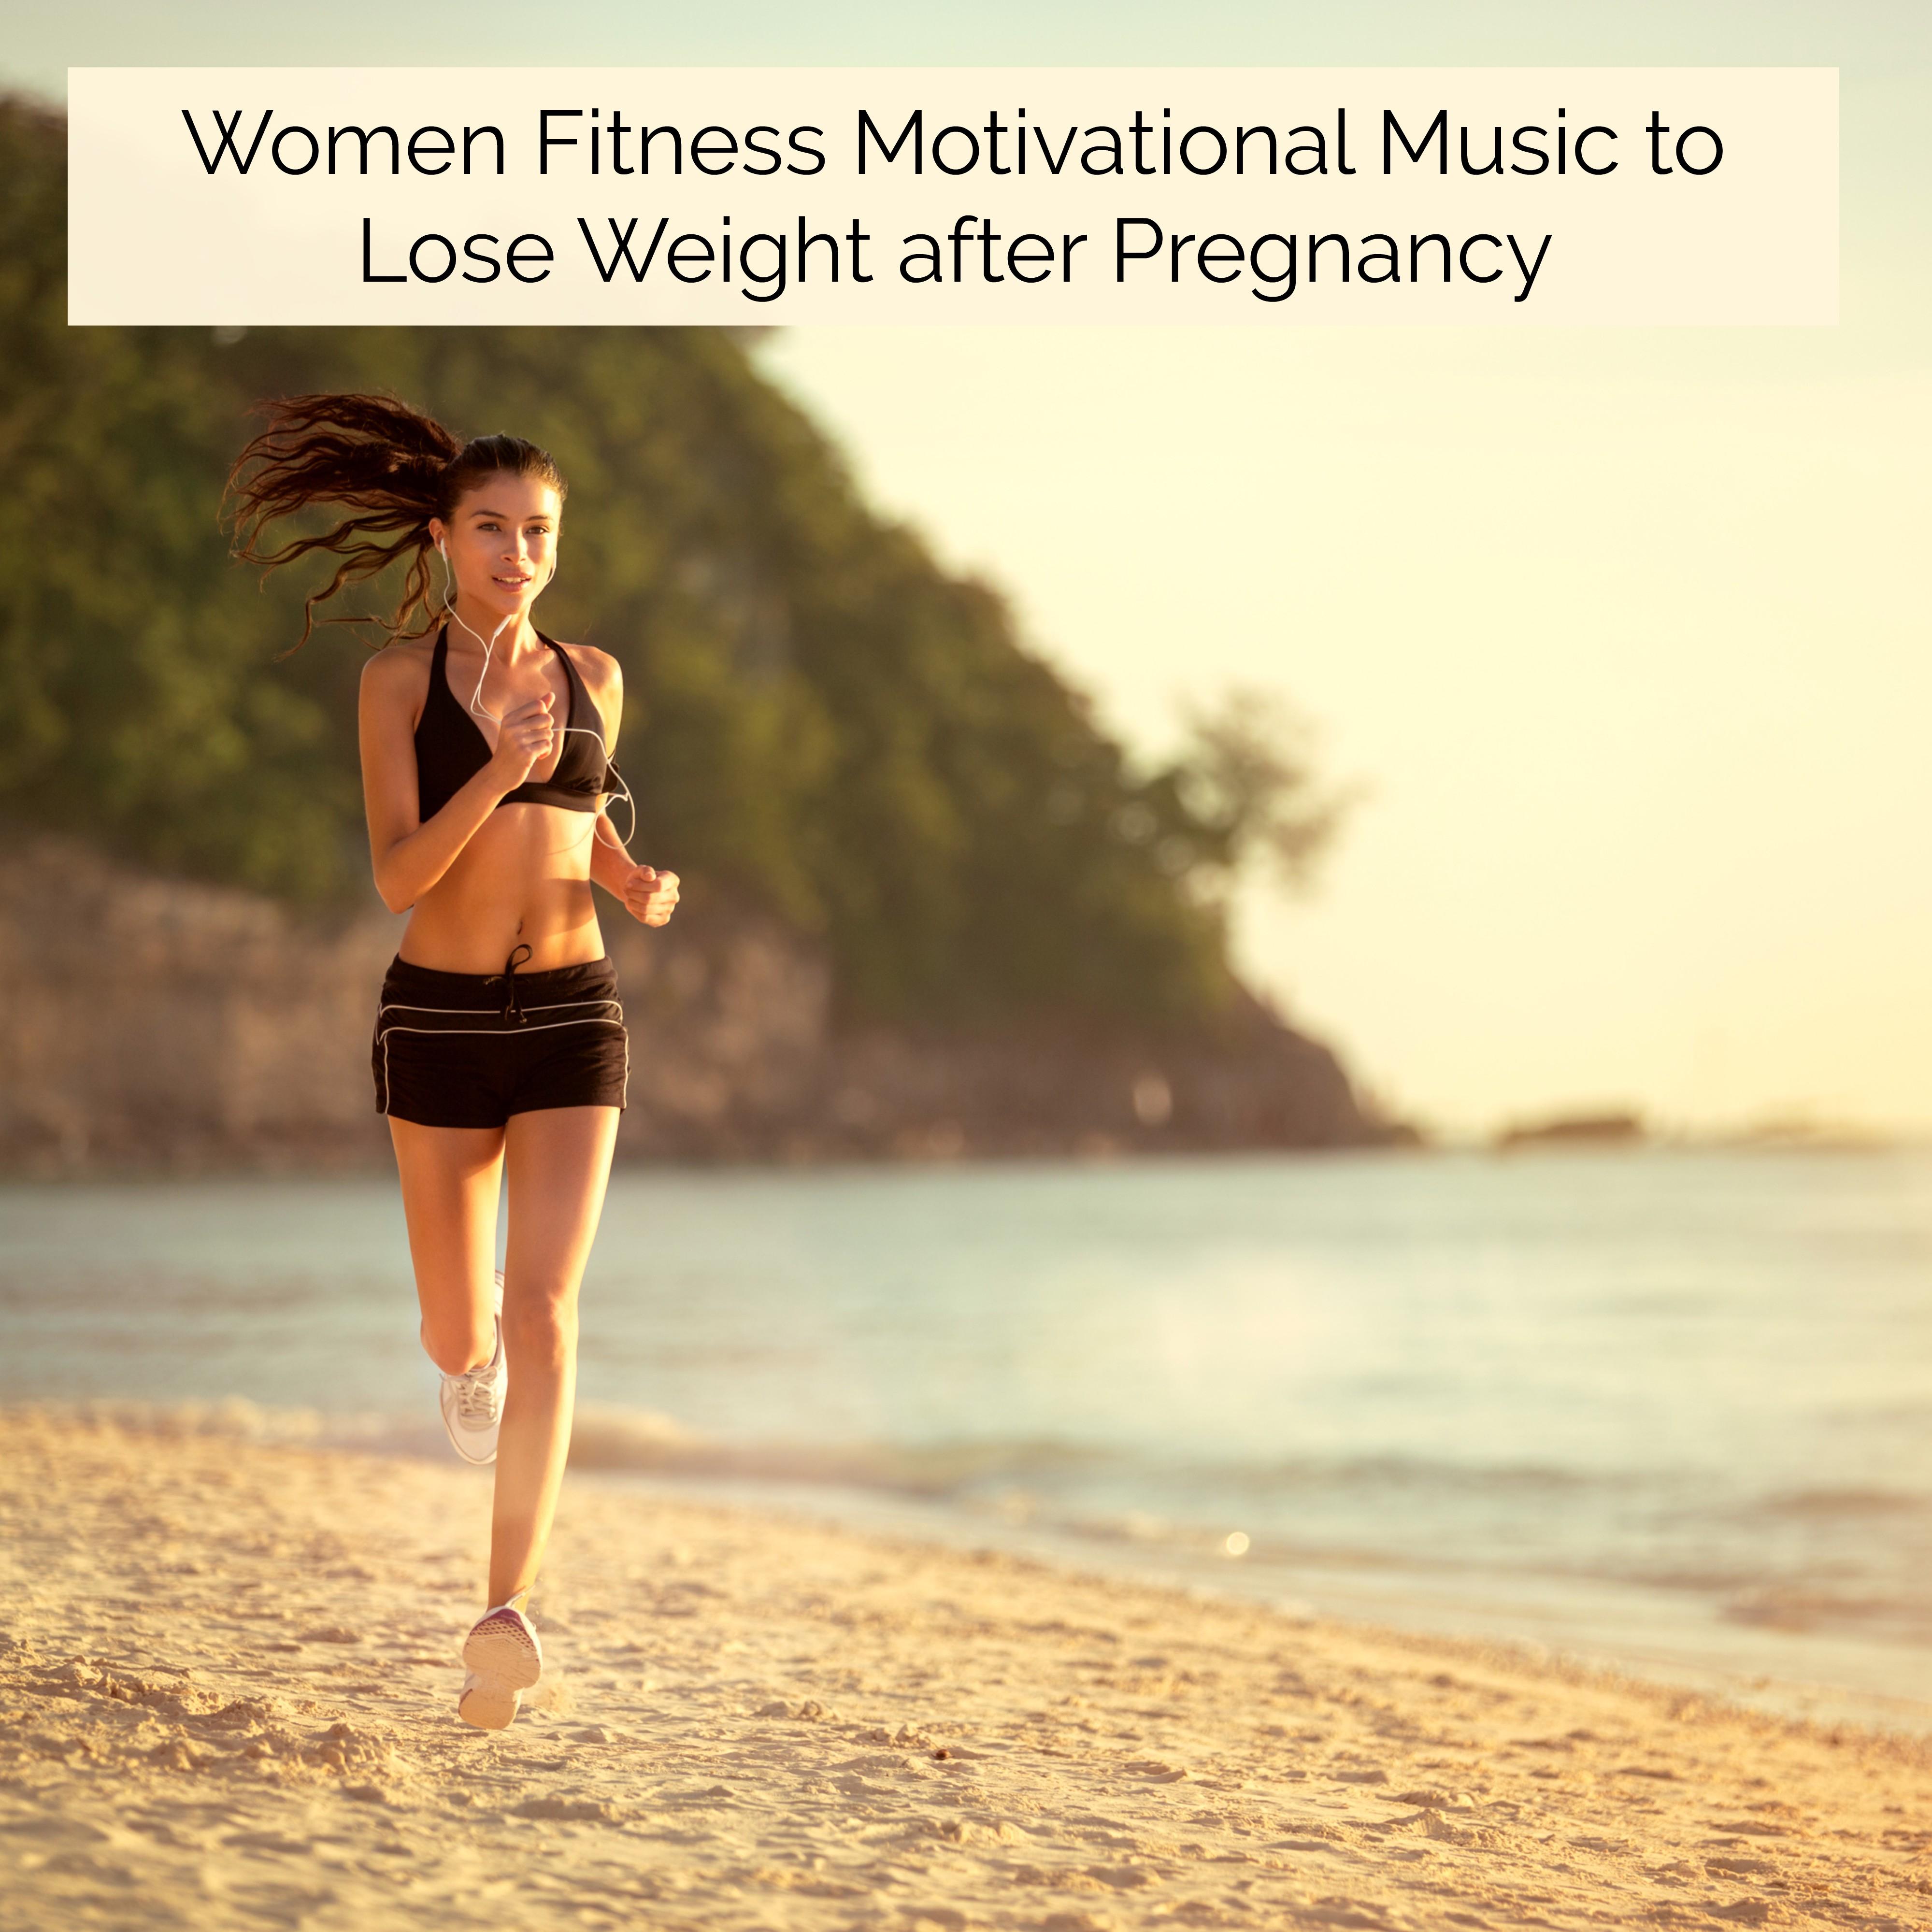 Women Fitness Motivational Music to Lose Weight after Pregnancy – Easy Listening Music for Easy Fitness, Yoga, Relaxation and Final Spa Treatments